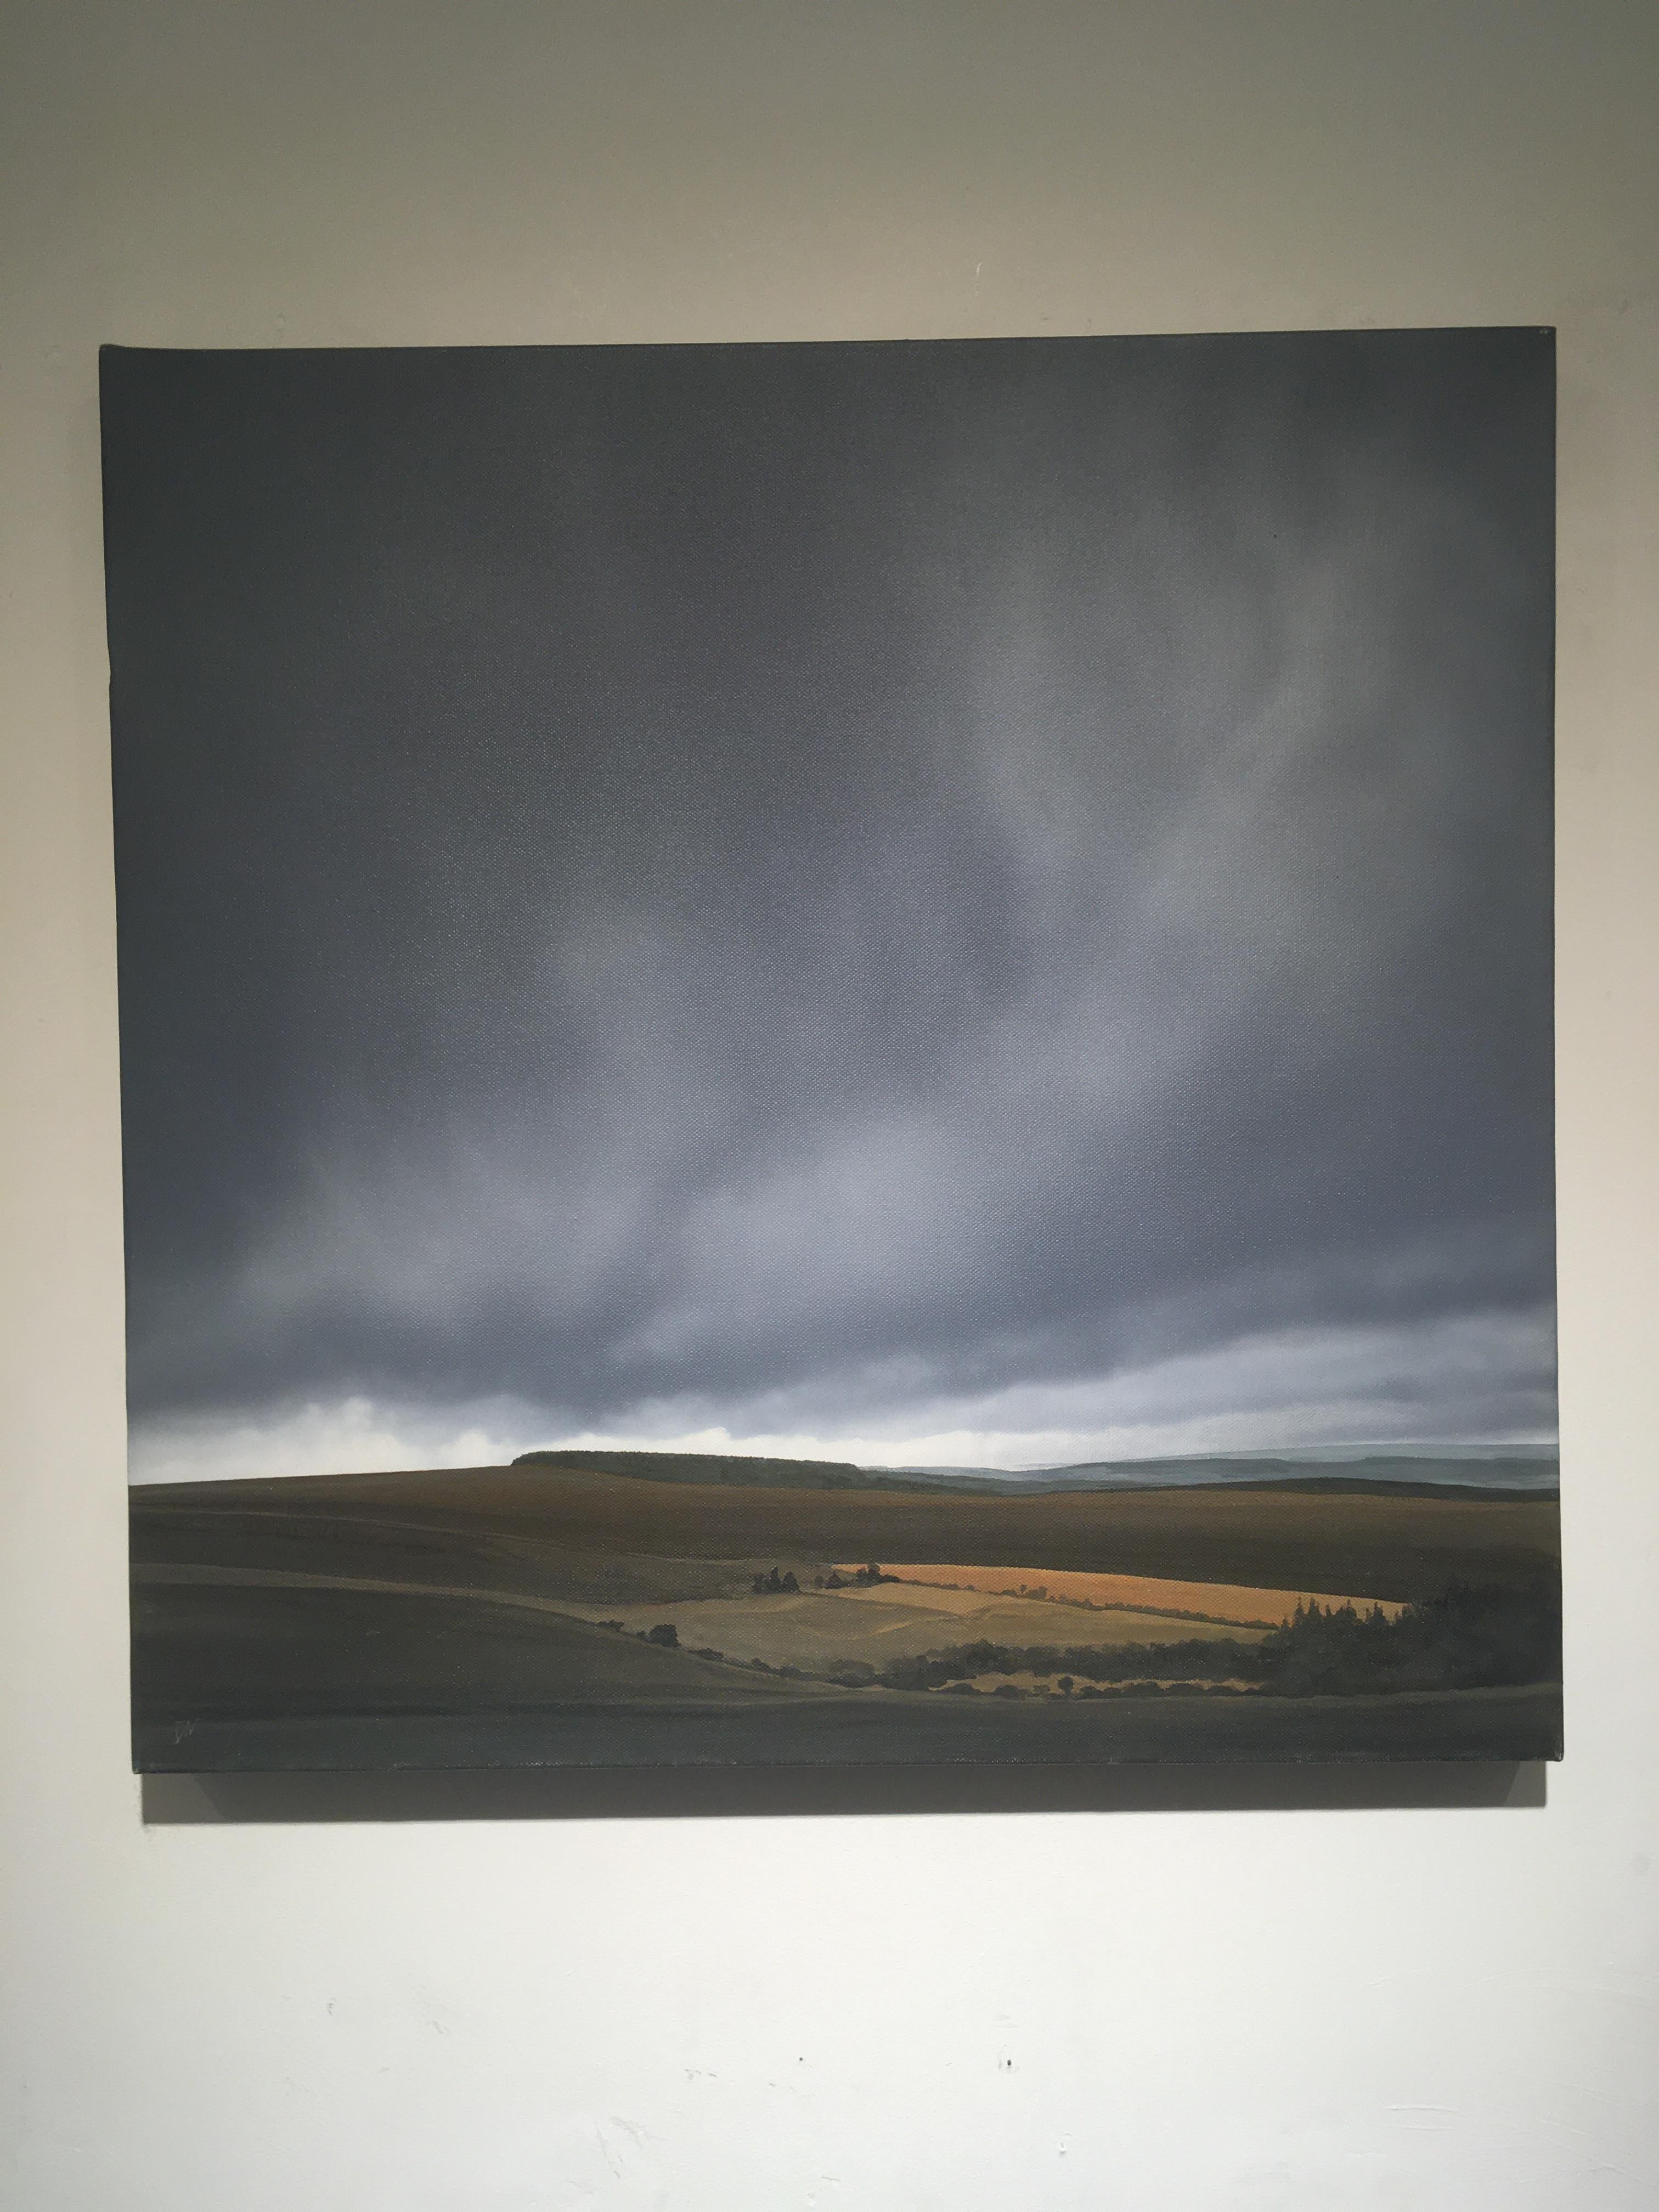 Dartmoor in Low Cloud - contemporary photorealistic stormy landscape clouds - Painting by Terry Watts